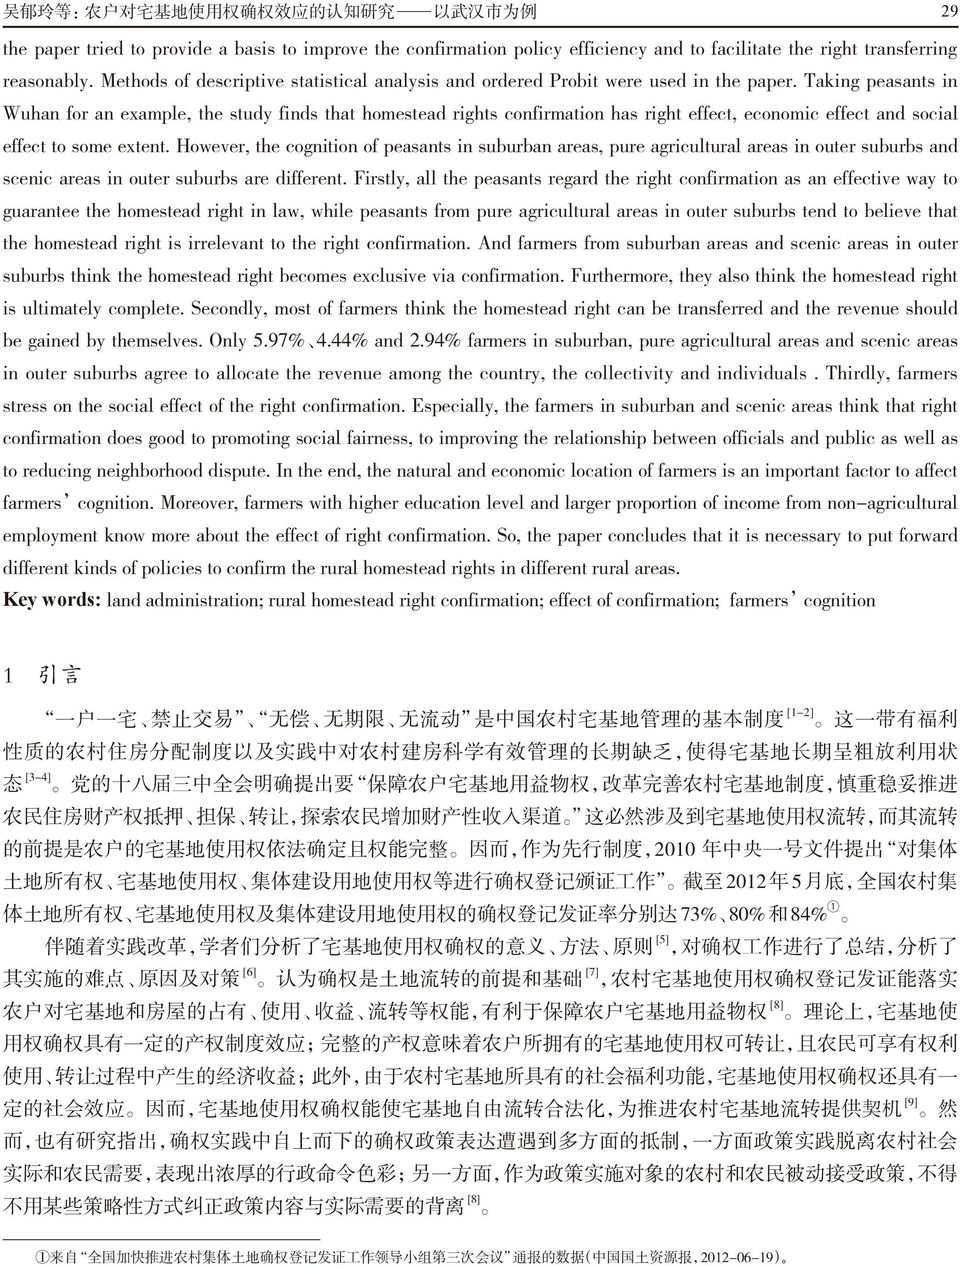 Taking peasants in Wuhan for an example, the study finds that homestead rights confirmation has right effect, economic effect and social effect to some extent.